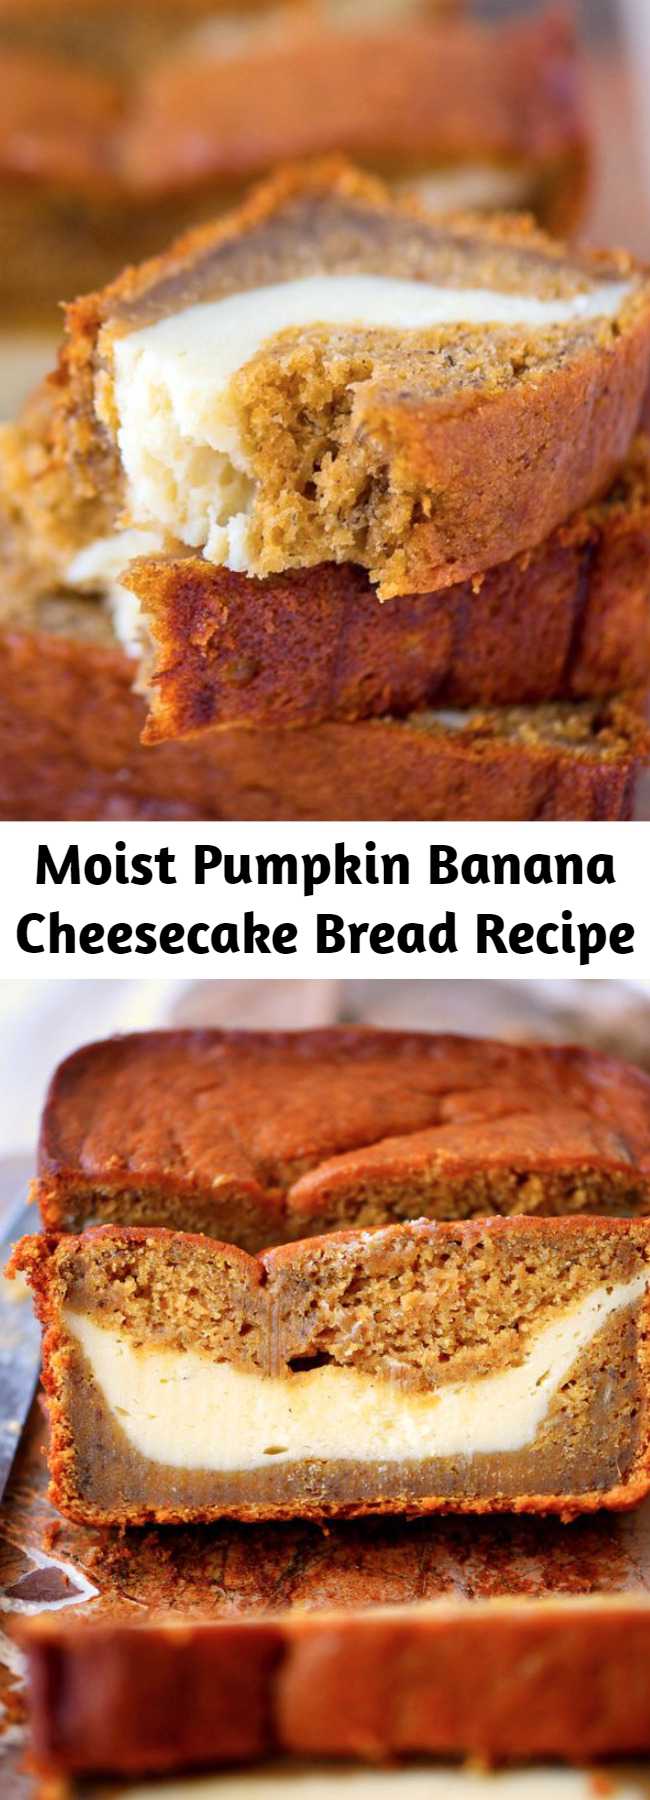 Moist Pumpkin Banana Cheesecake Bread Recipe - This Pumpkin Cheesecake Banana Bread is perfect for dessert but also doubles as an amazing breakfast...or snack...or lunch. It's pretty amazing no matter what time you eat it! Ultra moist and bursting with pumpkin flavor!